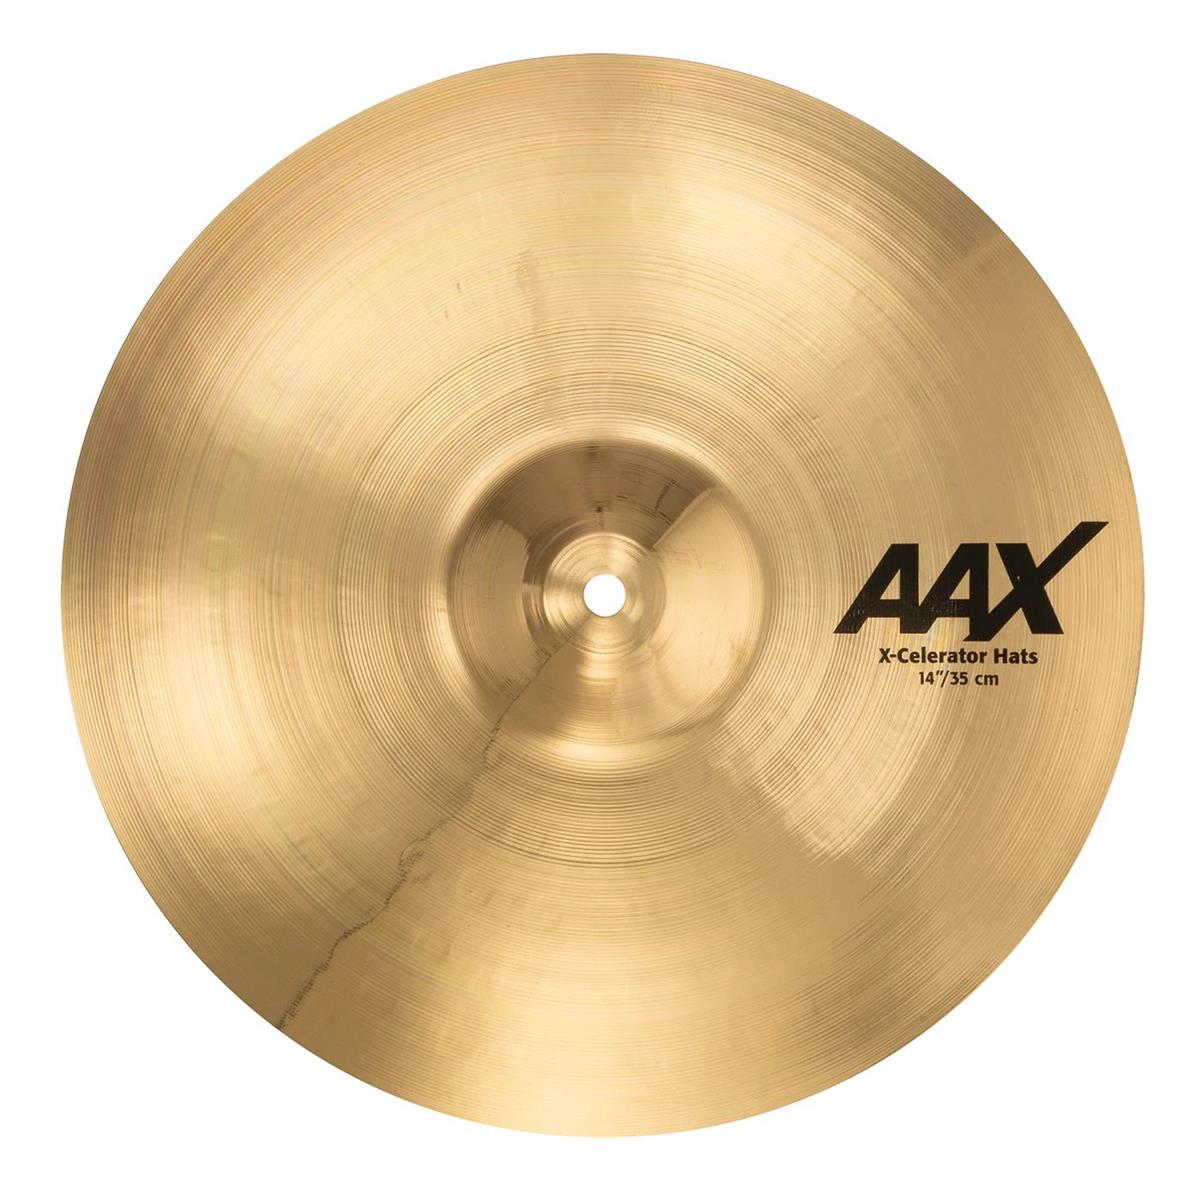 Sabian 14" AAX X-Celerator Hat Bottom Cymbal, Medium-Heavy, Brilliant Finish With a rippled Air Wave bottom eliminating airlock and delivering super crisp and cutting stick sounds, SABIAN 14" AAX X-Celerator Hi-Hats cut through with exceptional clarity at all volumes. The SABIAN AAX series delivers consistently bright, crisp, clear and cutting responses - AAX is the ultimate Modern Bright sound!